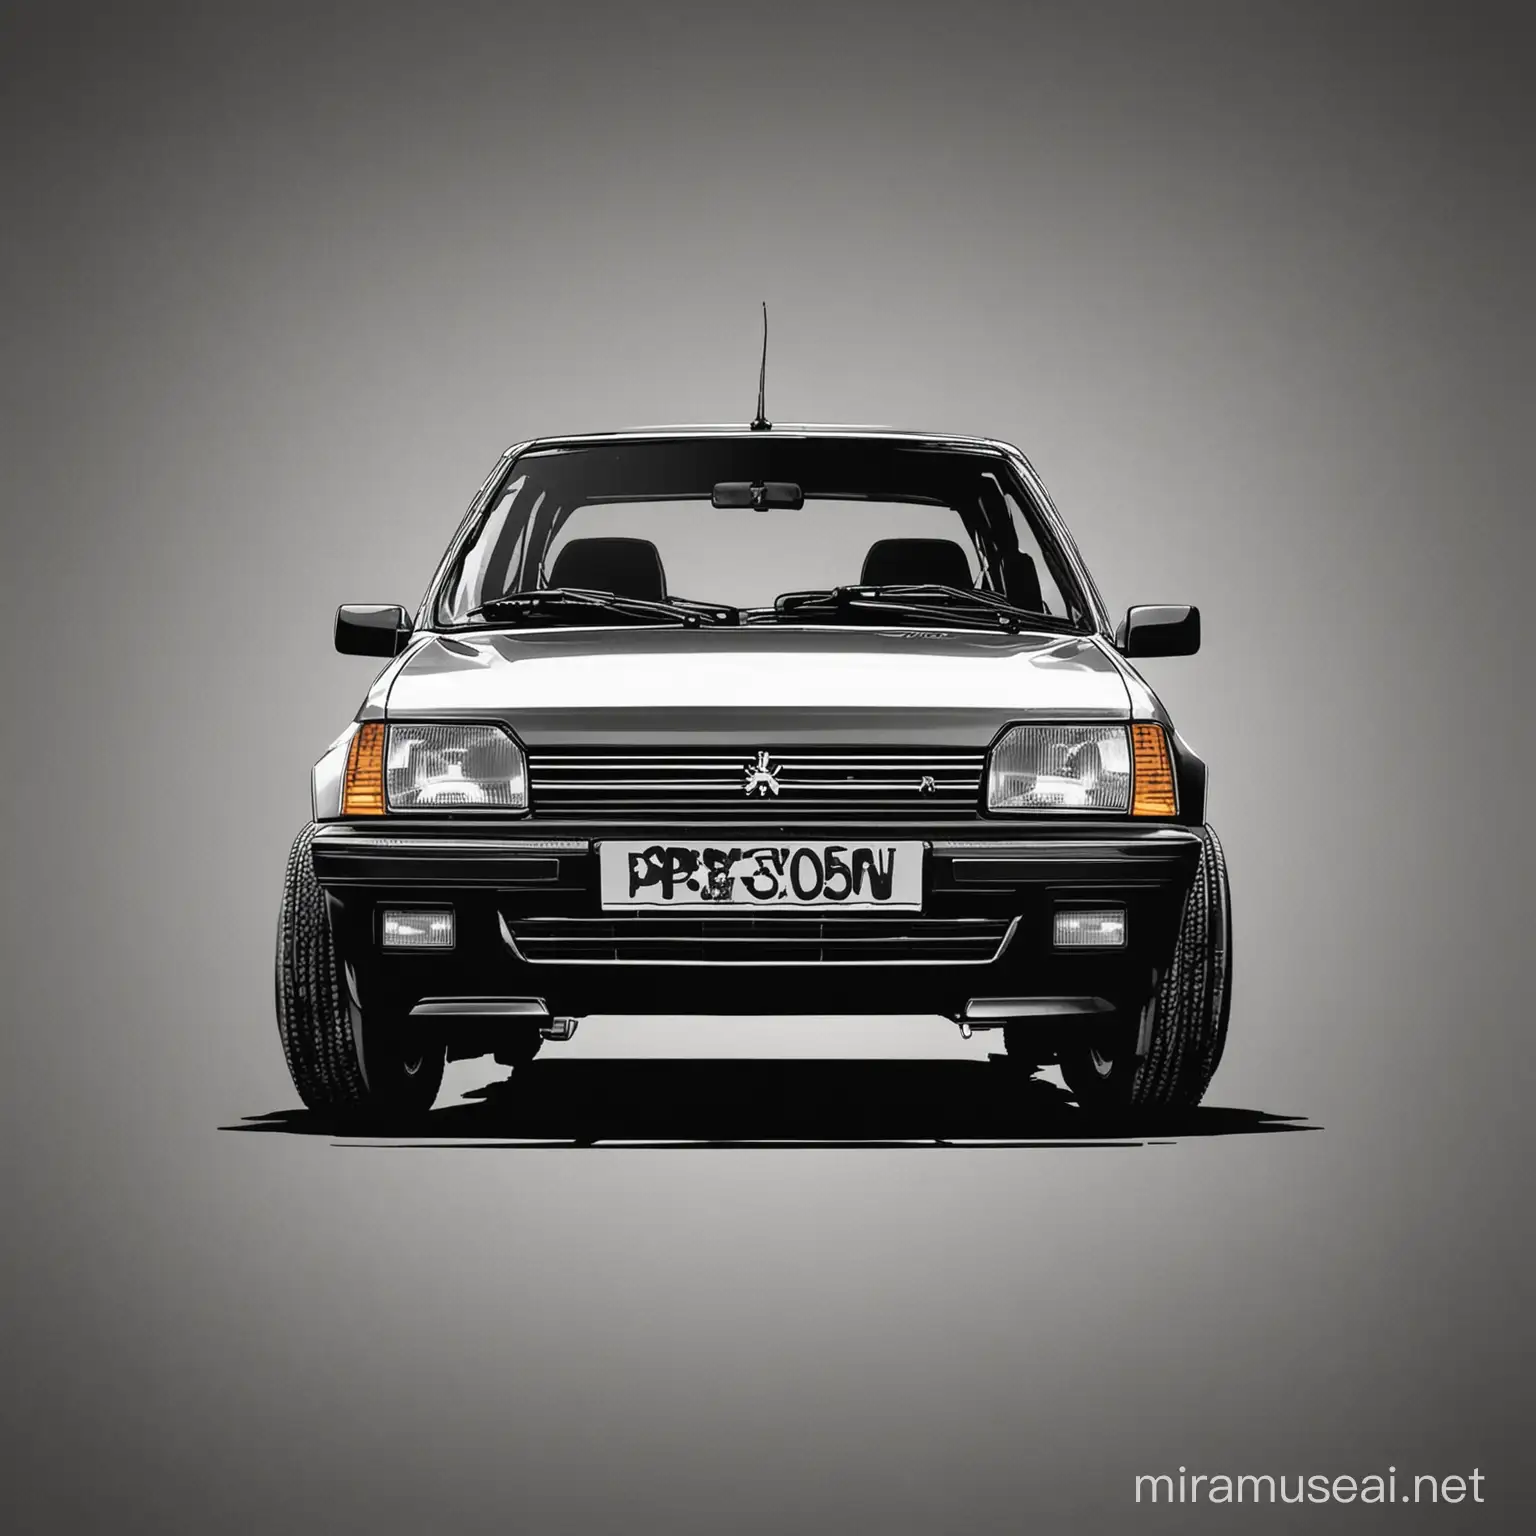 Cartoon Peugeot 205 Front View Stencil Art on White Background